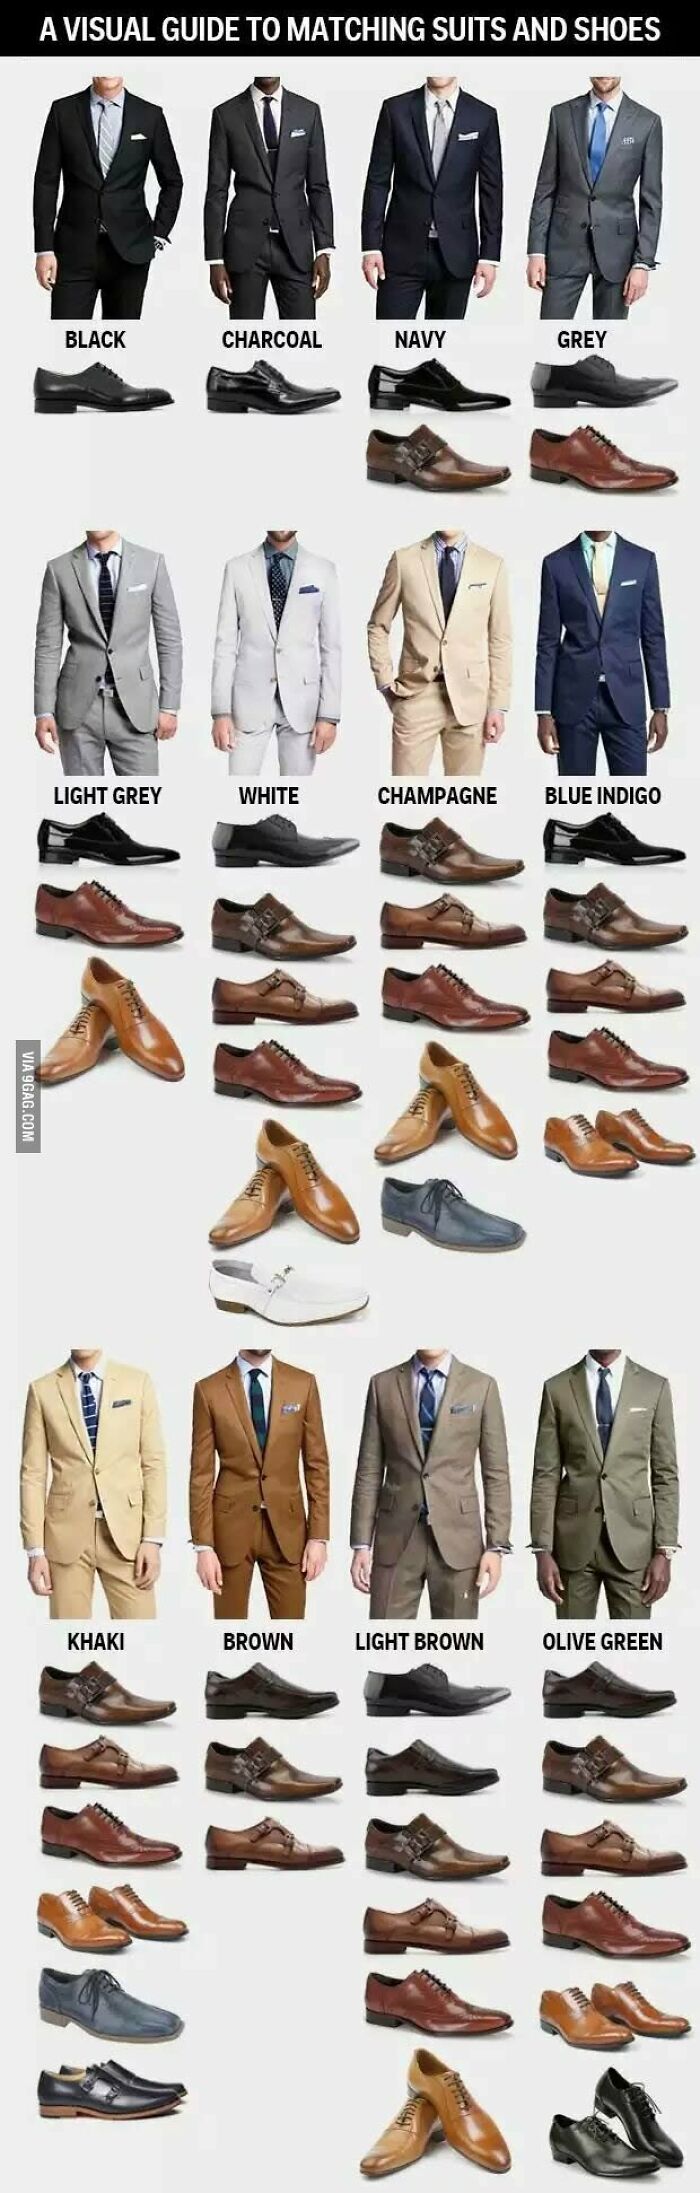 Visual Guides On Suits And Matching Shoes!